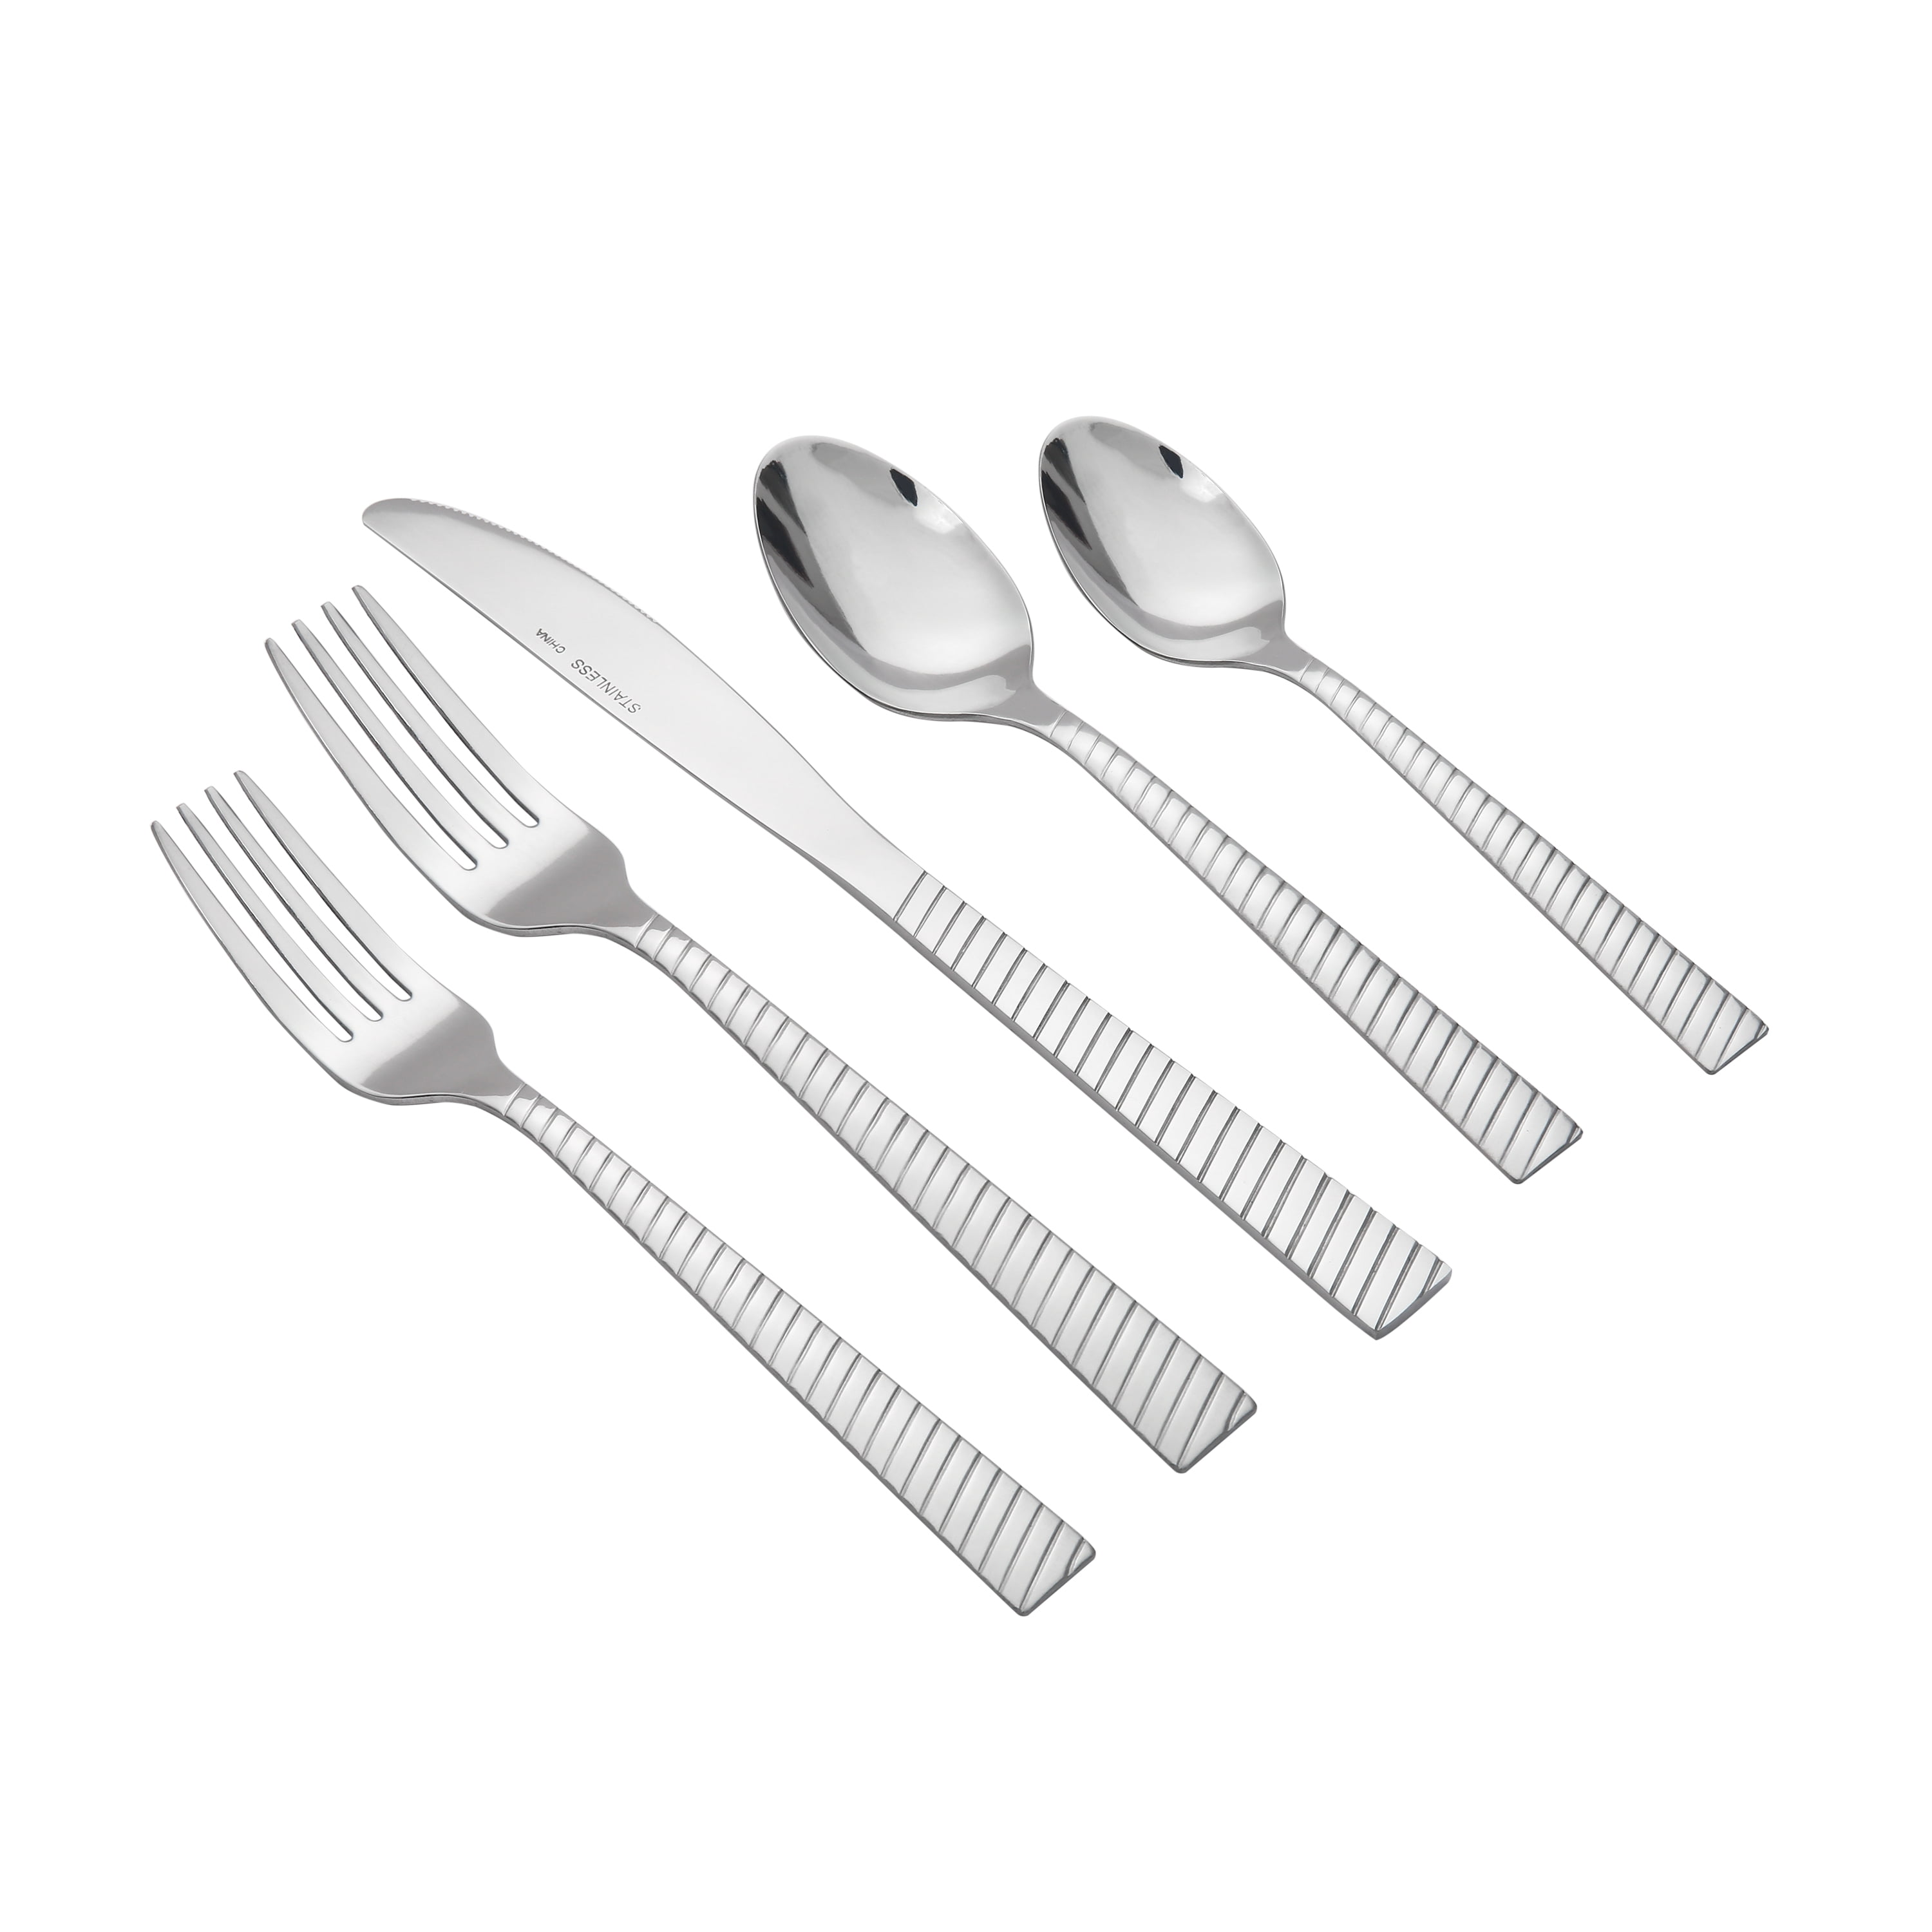 60 TEASPOONS WINDSOR FLATWARE 18/0 STAINLESS FREE SHIPPING US ONLY 